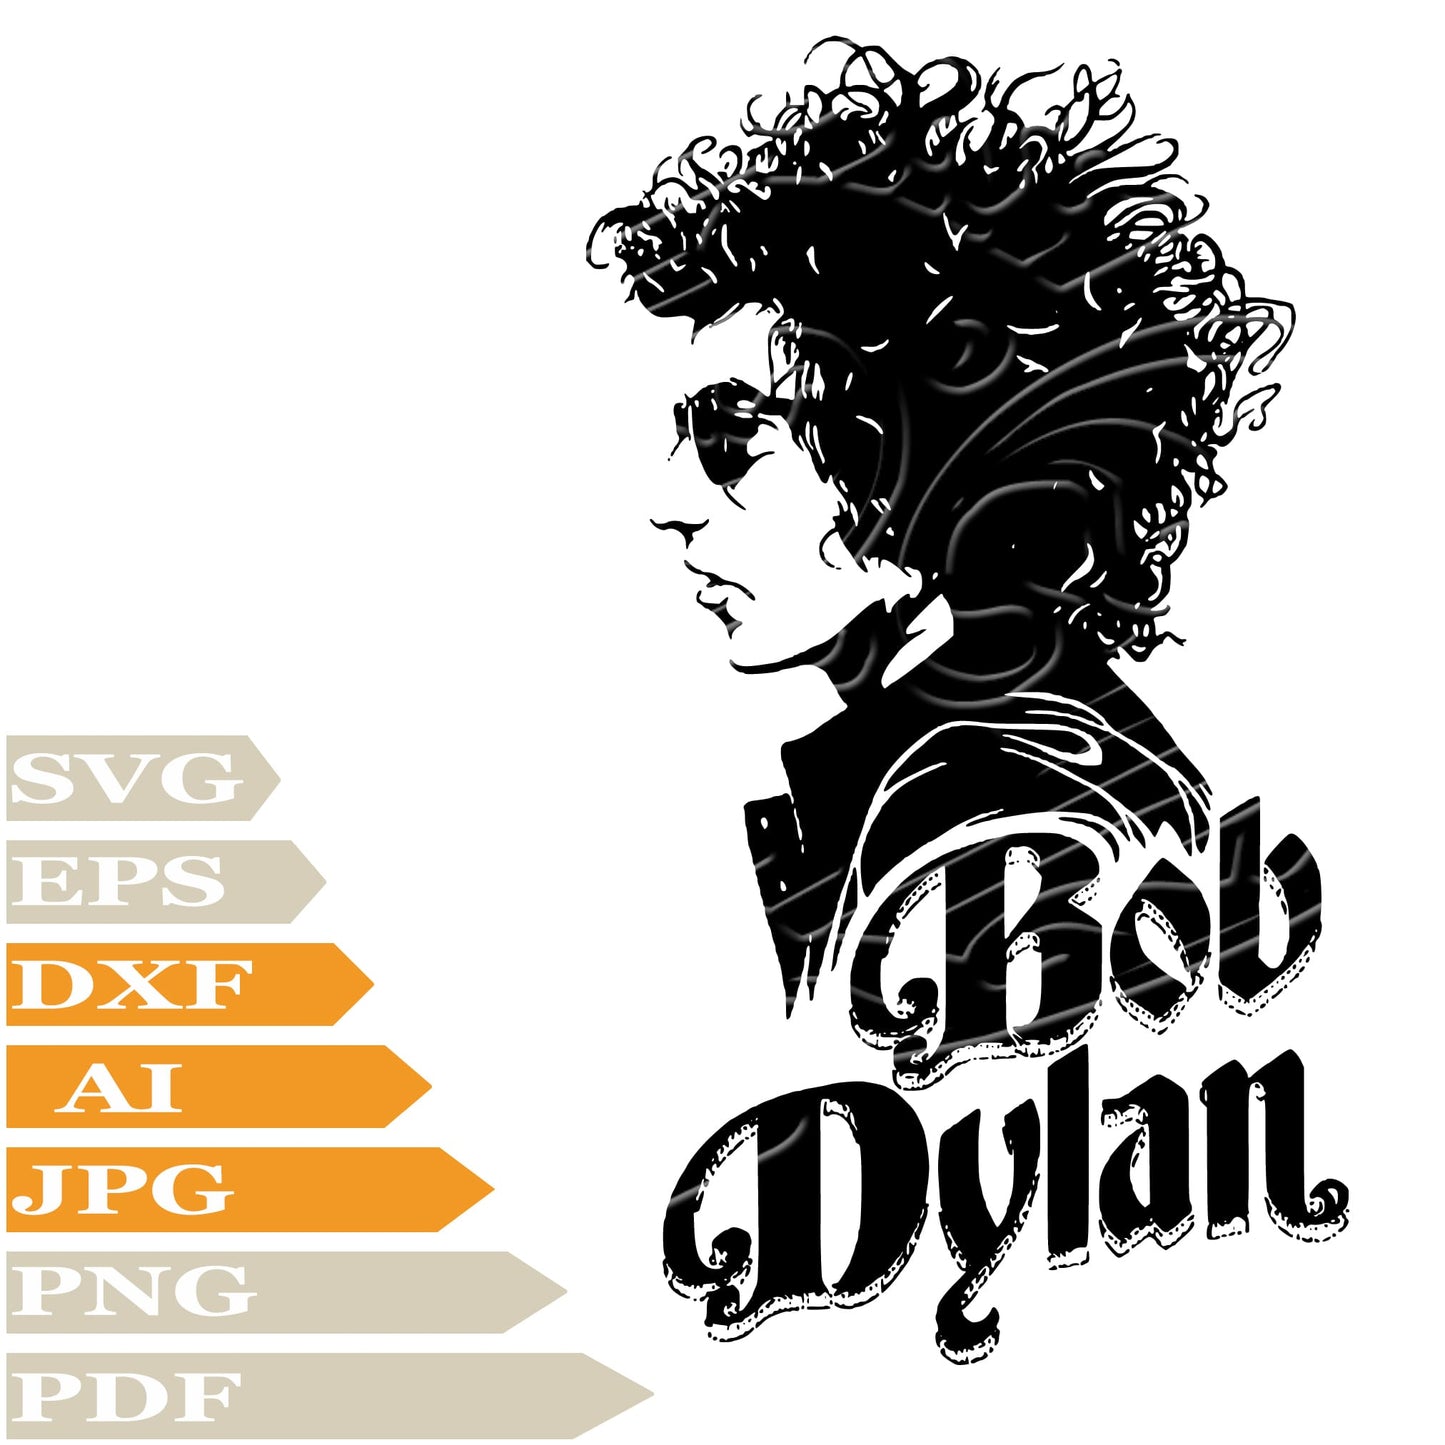 Bob Dylan Svg File, Image Cut, Png, For Tattoo, Silhouette, Digital Vector Download, Cut File, Clipart, For Cricut